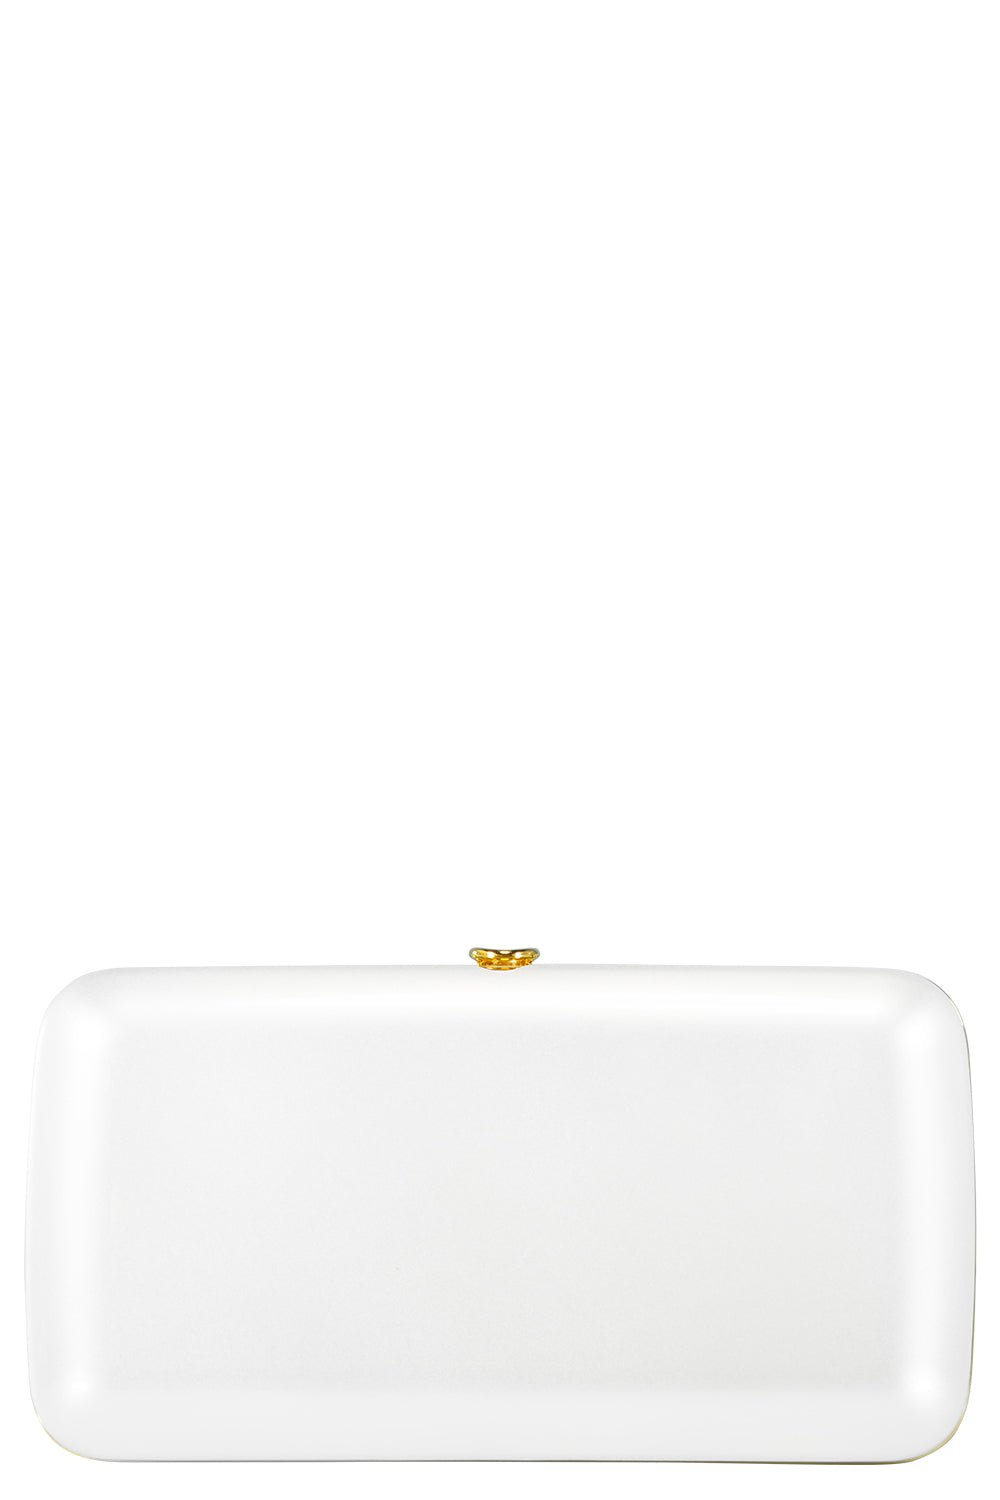 JEFFREY LEVINSON-Finley Clutch - White Pearl Gold-WHITE PEARL GOLD